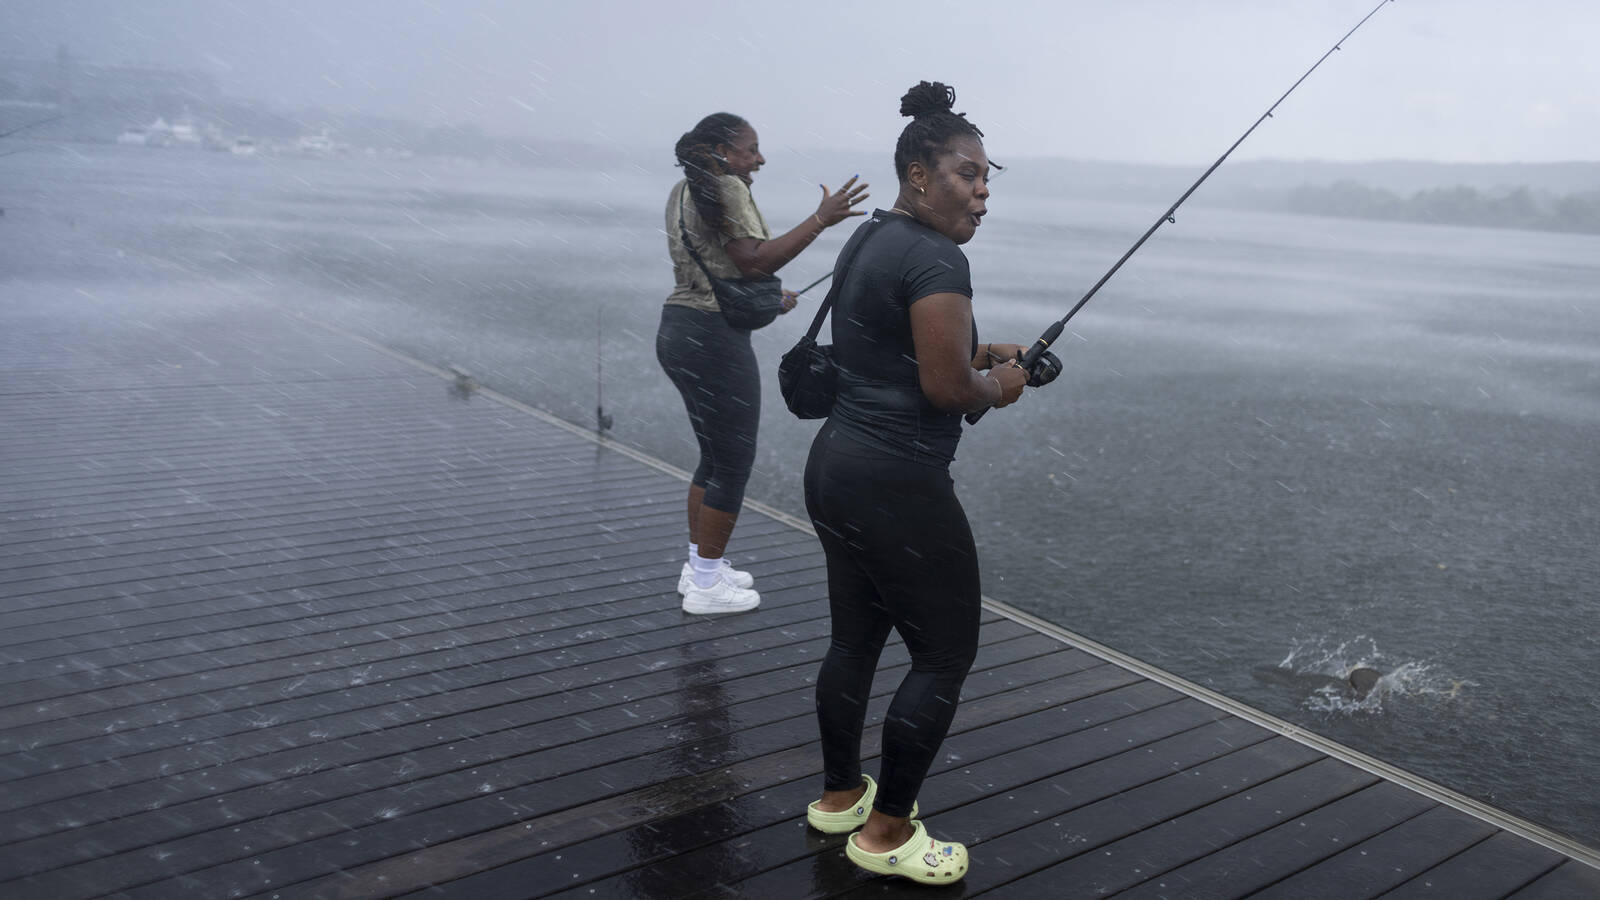 <p>Jazmine Thomas, left, and Ashley Rodgers at Friday Night Fishing, a free, catch-and-release event hosted by Anacostia Riverkeeper during the summer months. When a temperate evening suddenly turned stormy, they were reluctant to leave because they were having such a good time. They were the last pair out on the dock.</p>